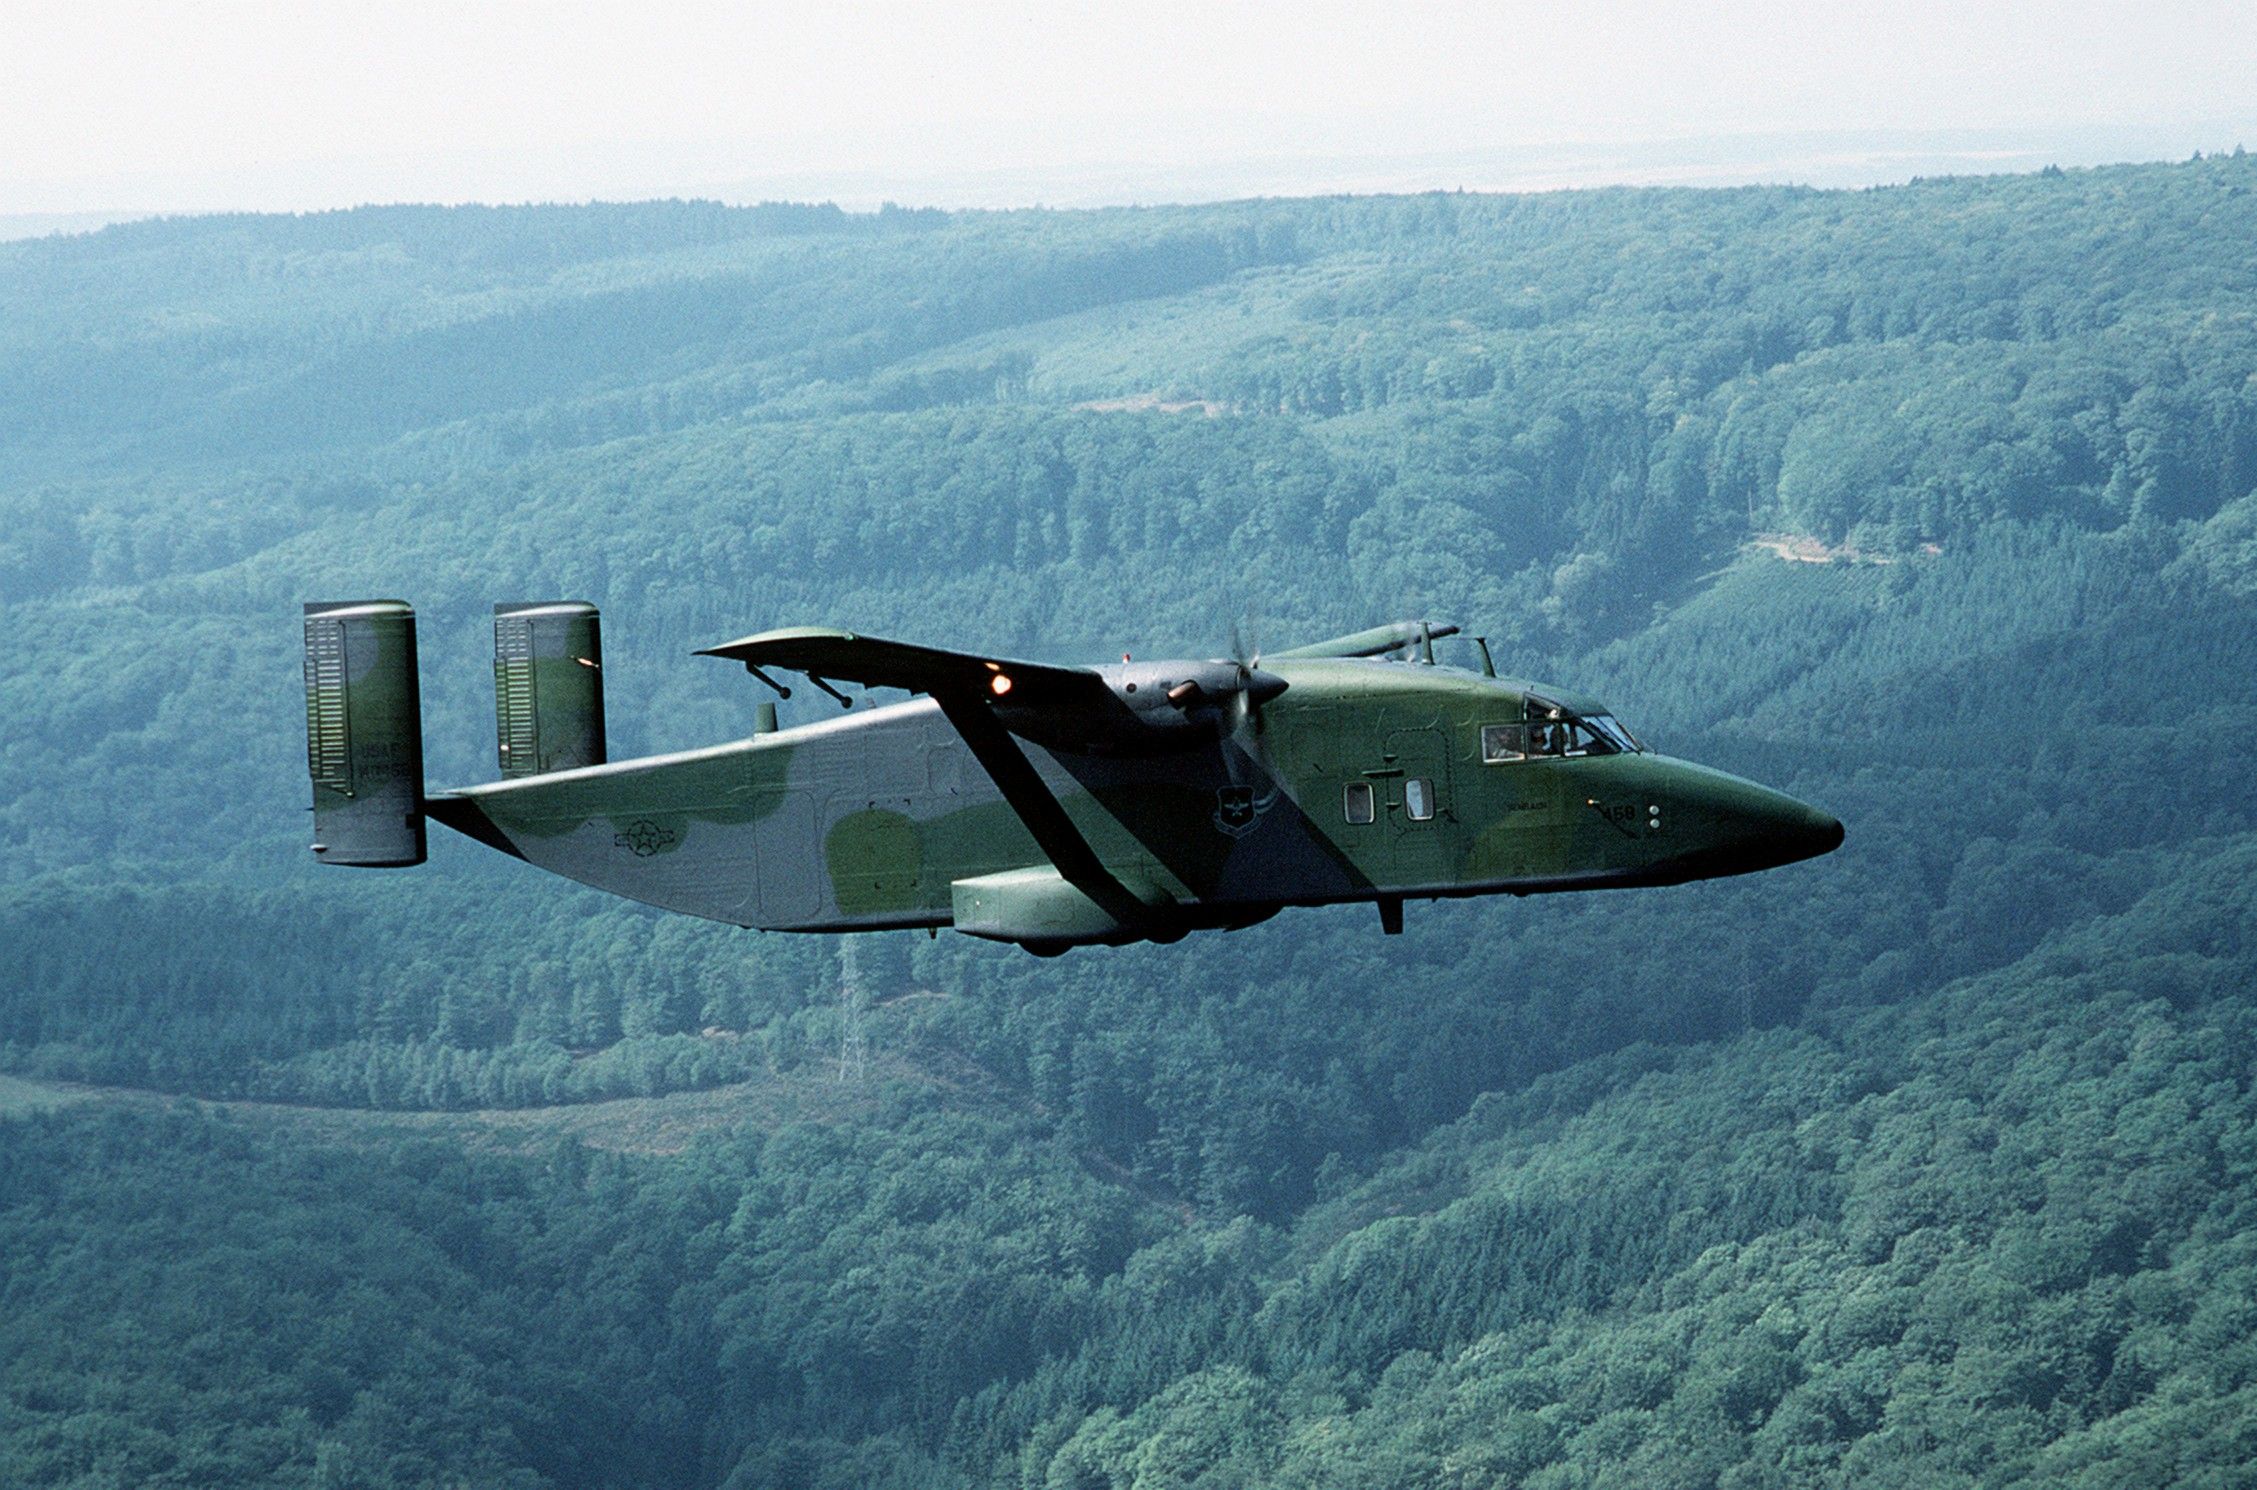 First variant of the Short Sherpa painted in military camouflage colors flying over a wooded area